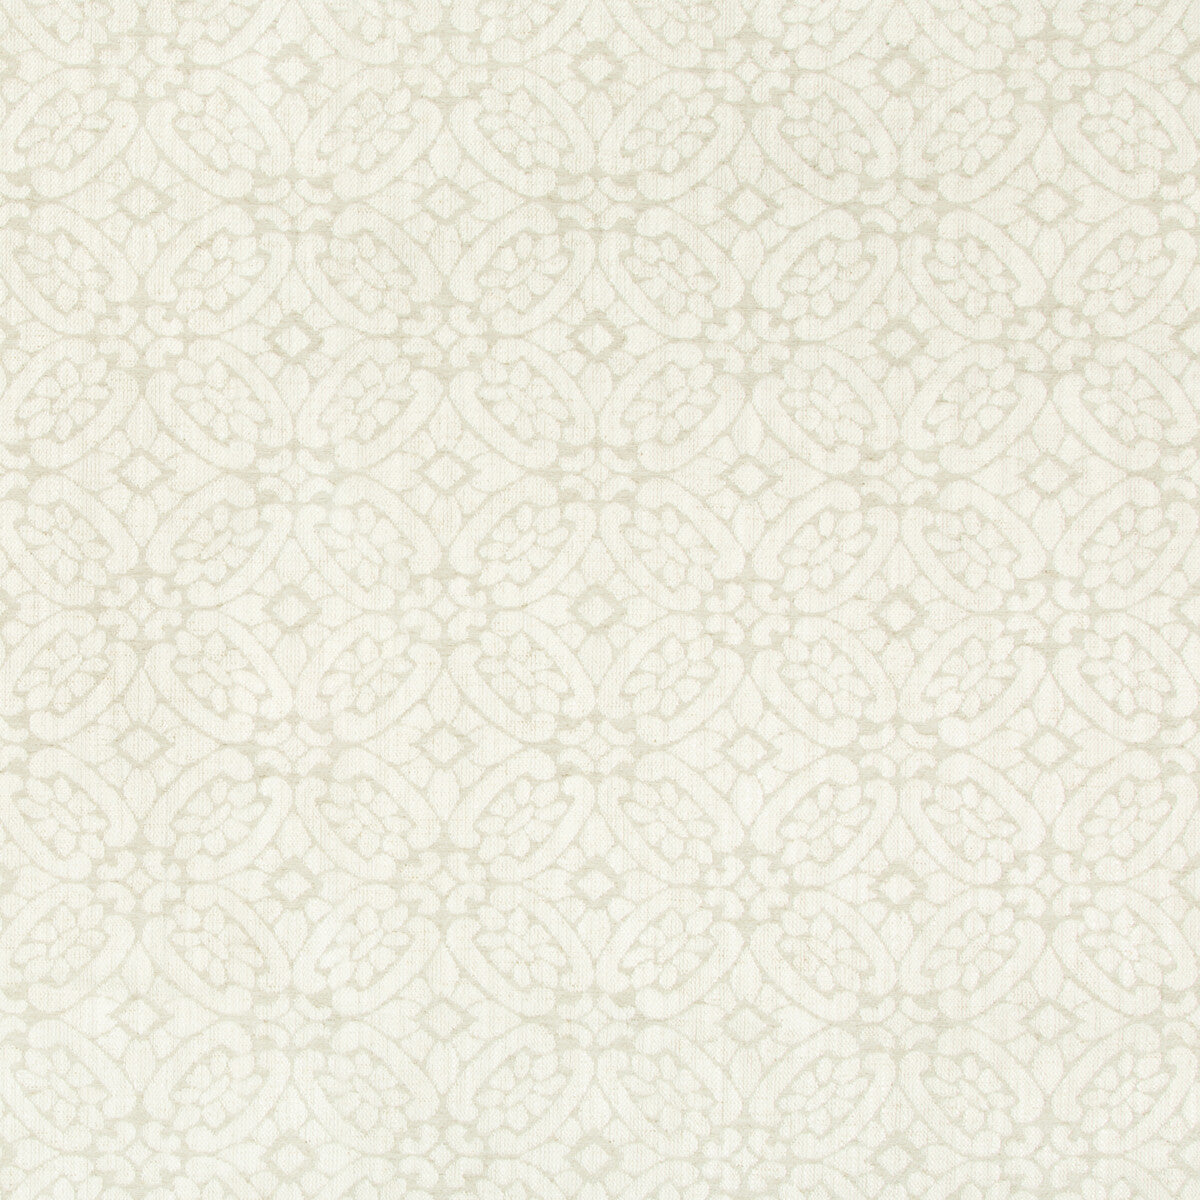 Set The Tone fabric in taupe color - pattern 33556.116.0 - by Kravet Couture in the Modern Tailor collection